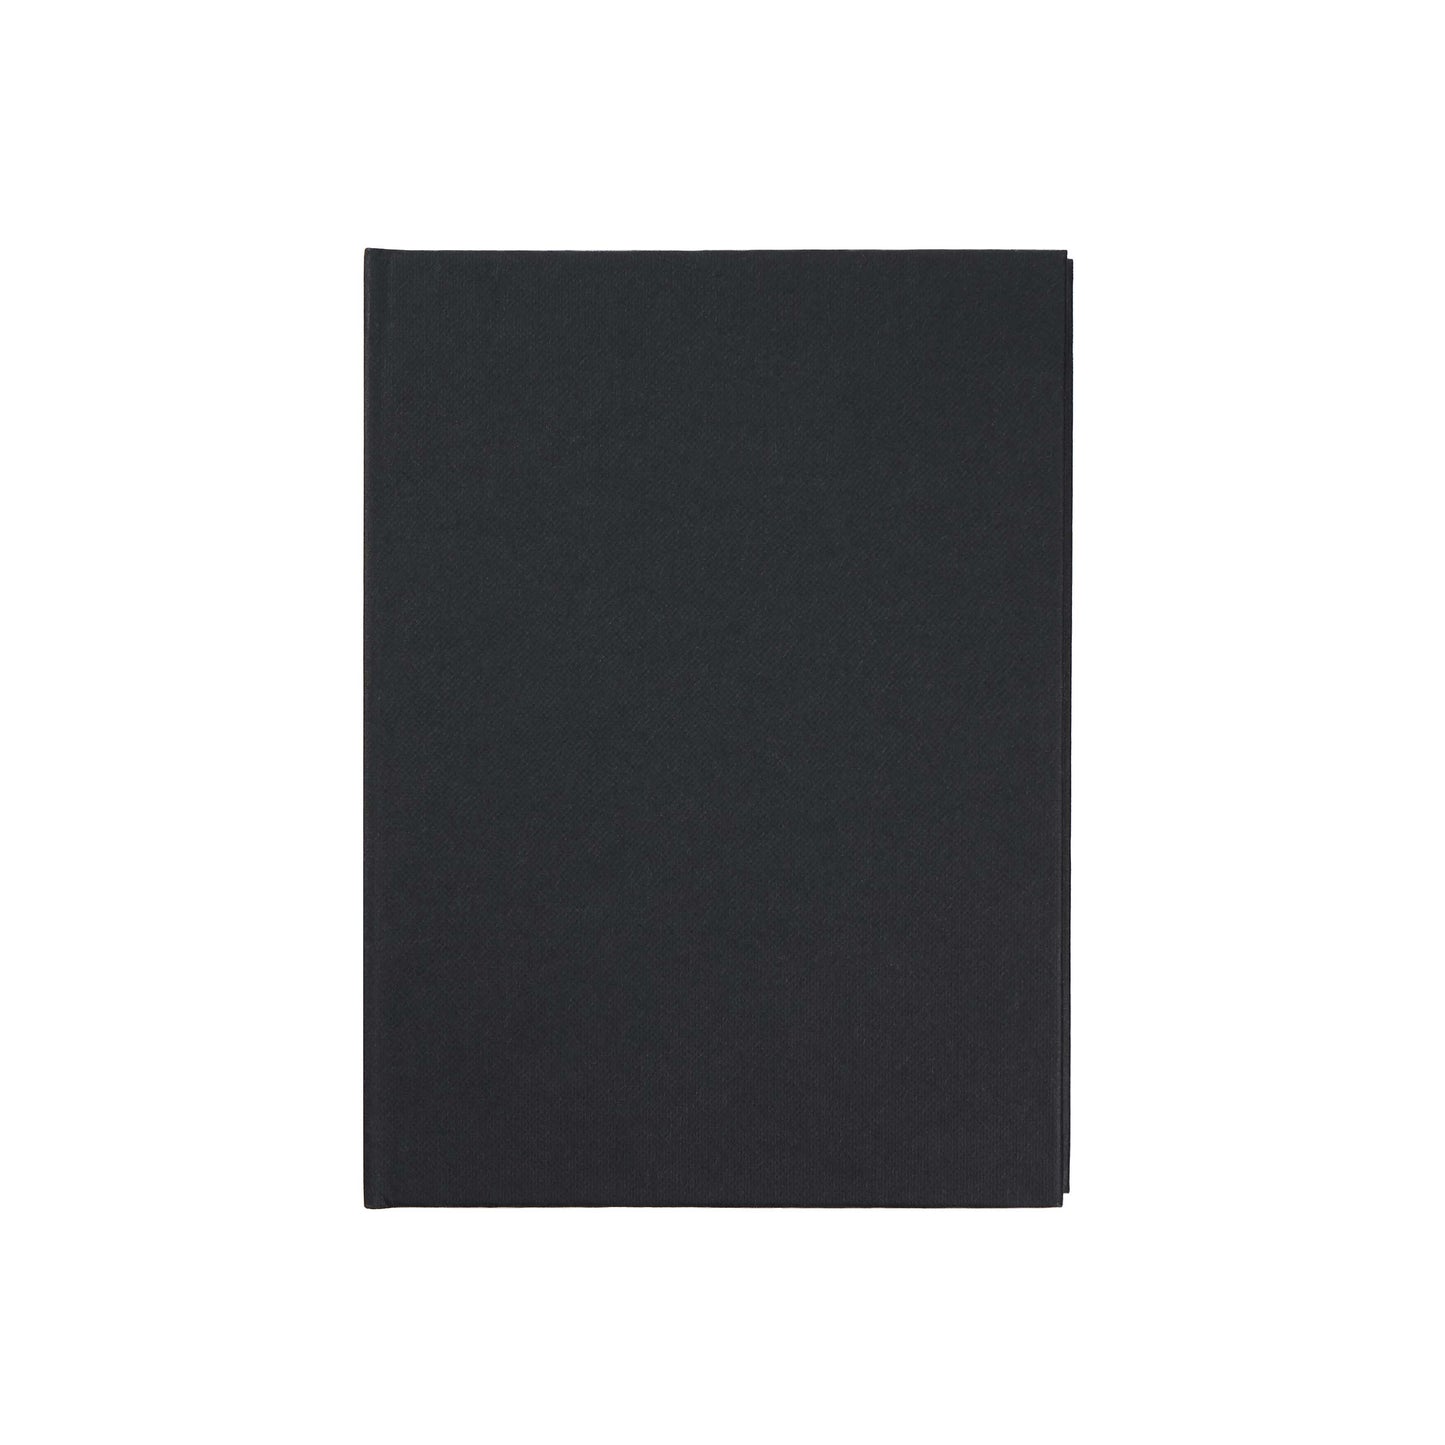 black blocker paper hardcover notebook, notebook for fountain pens against a white background